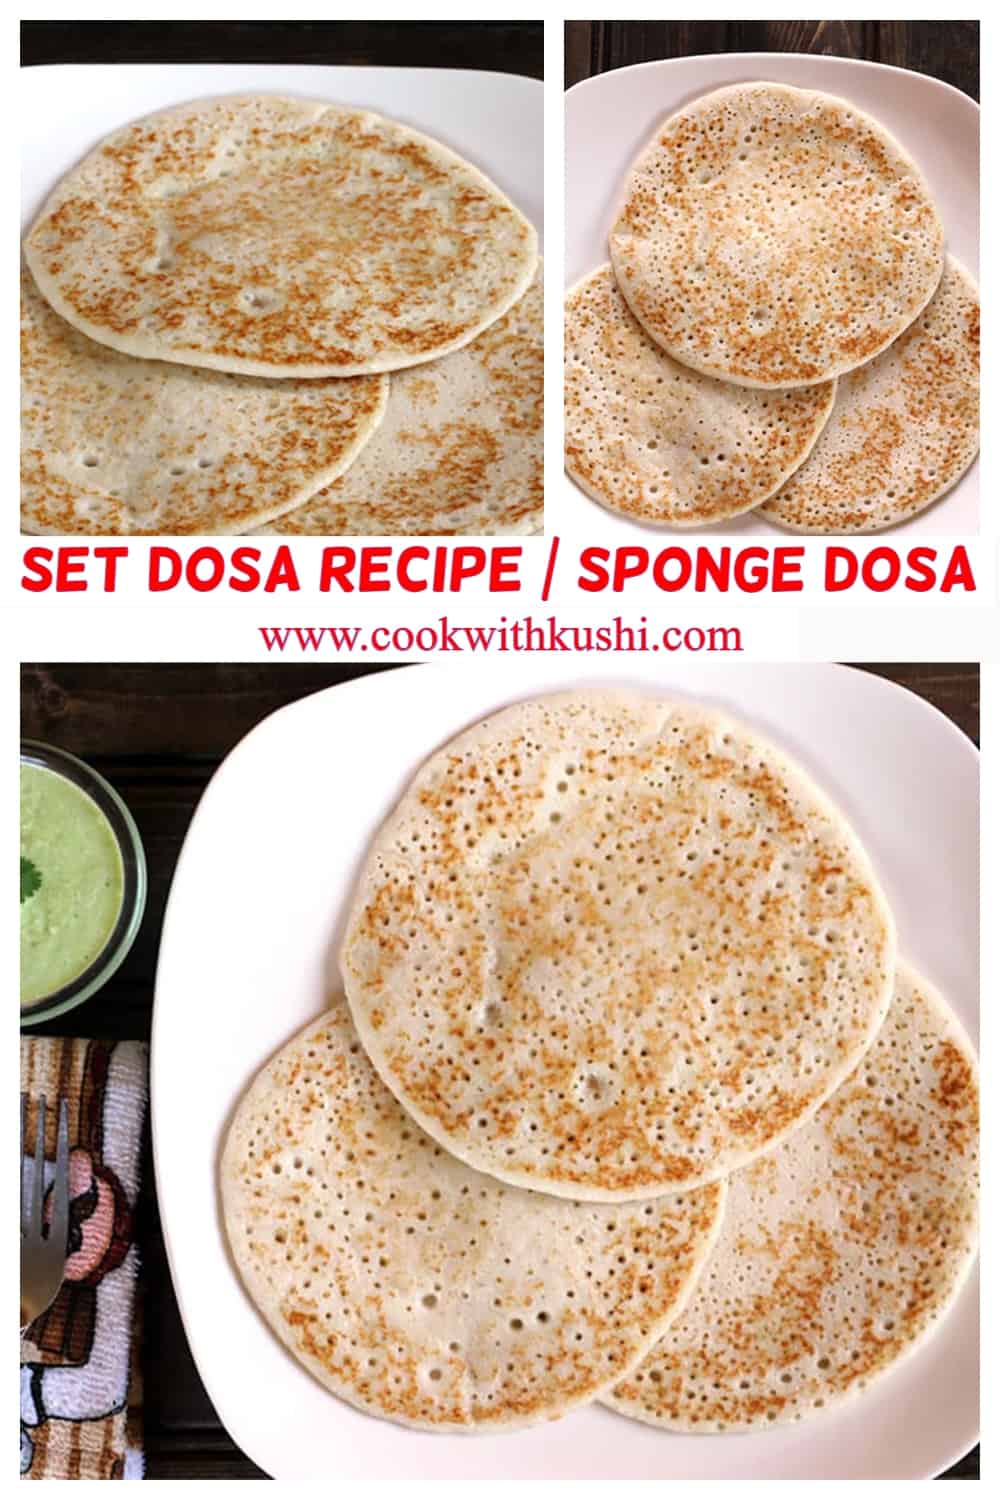 traditional South Indian Breakfast - Set dosa or SPonge Dosa served in set of 2 or 3 with chutney 